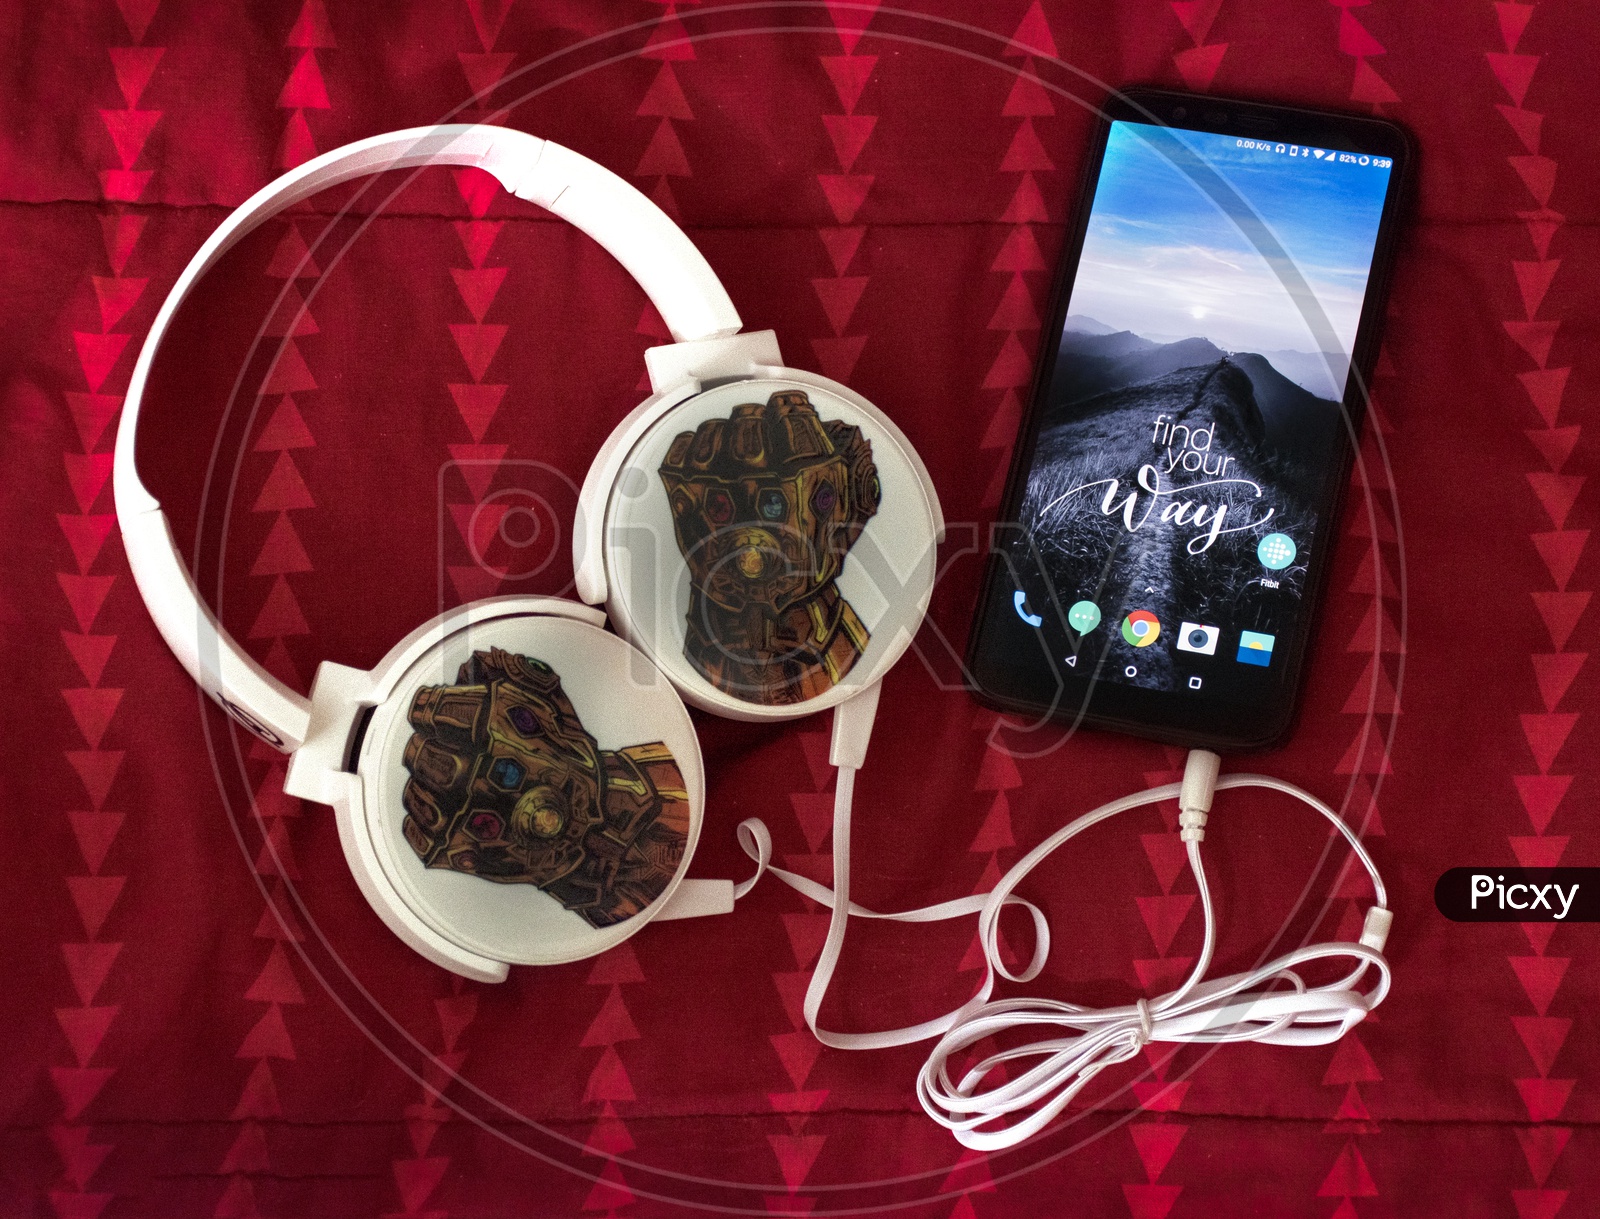 Max headphones and Oneplus 5t mobile